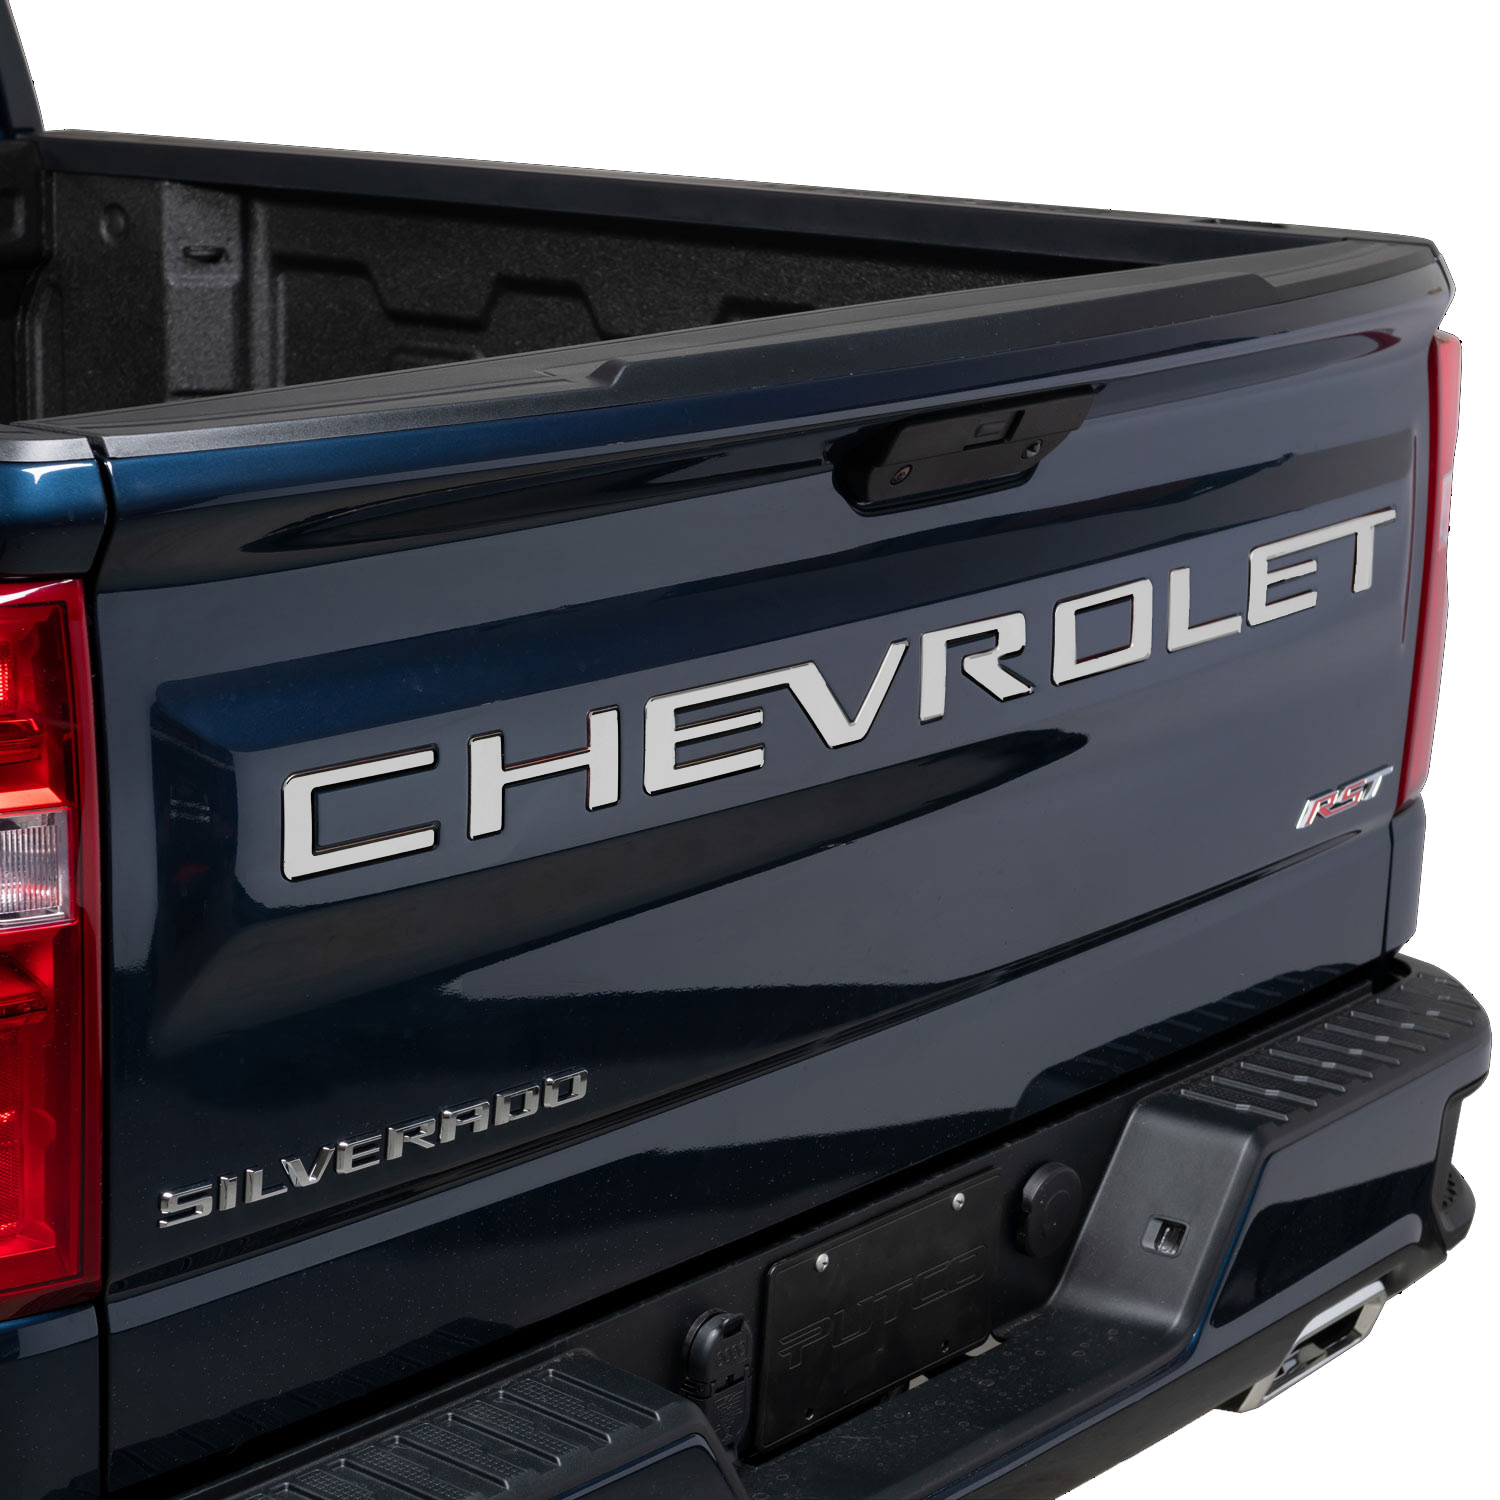 Qook 3D Tailgate Insert Letter For 2019-2020 Chevrolet Silverado With 3M Adhesive，Car Rear Groove Insert Letter Emblem ，Strong Adsorption Logo 